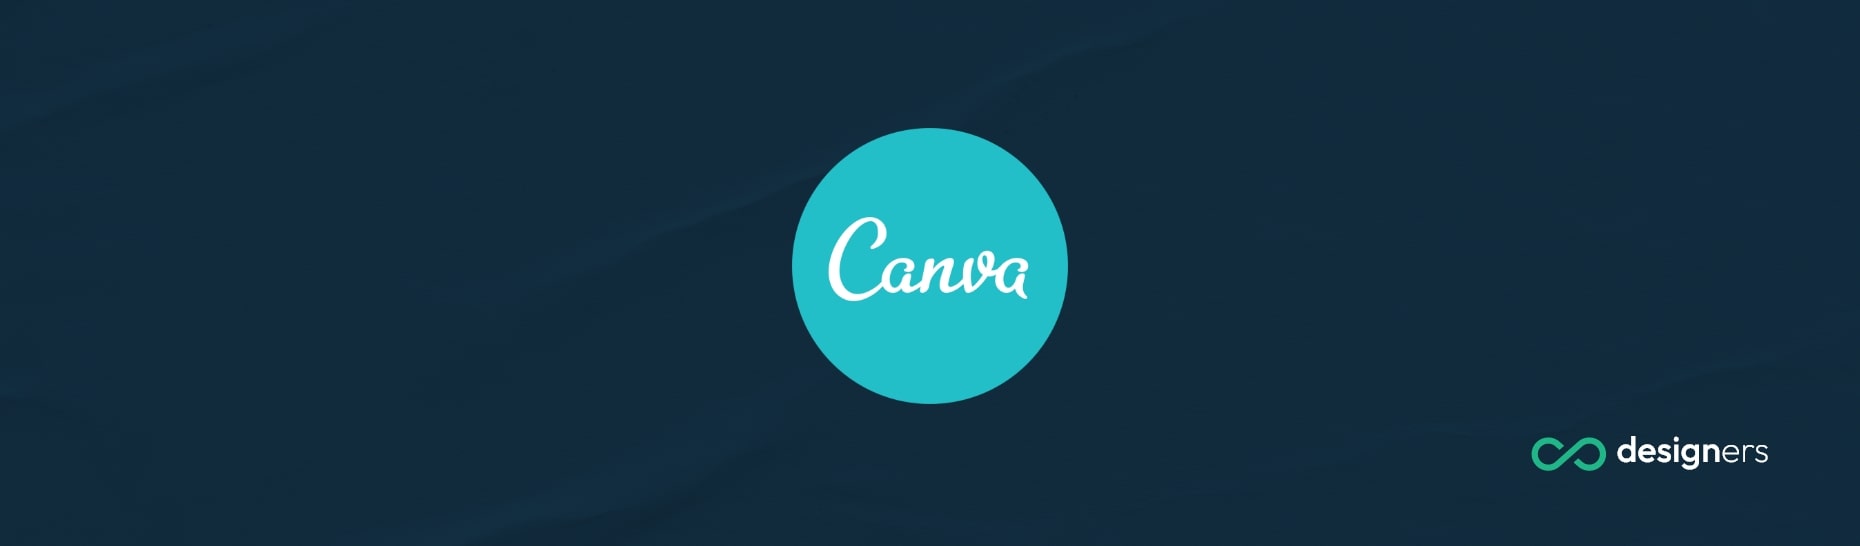 Is Canva Available in the UK?